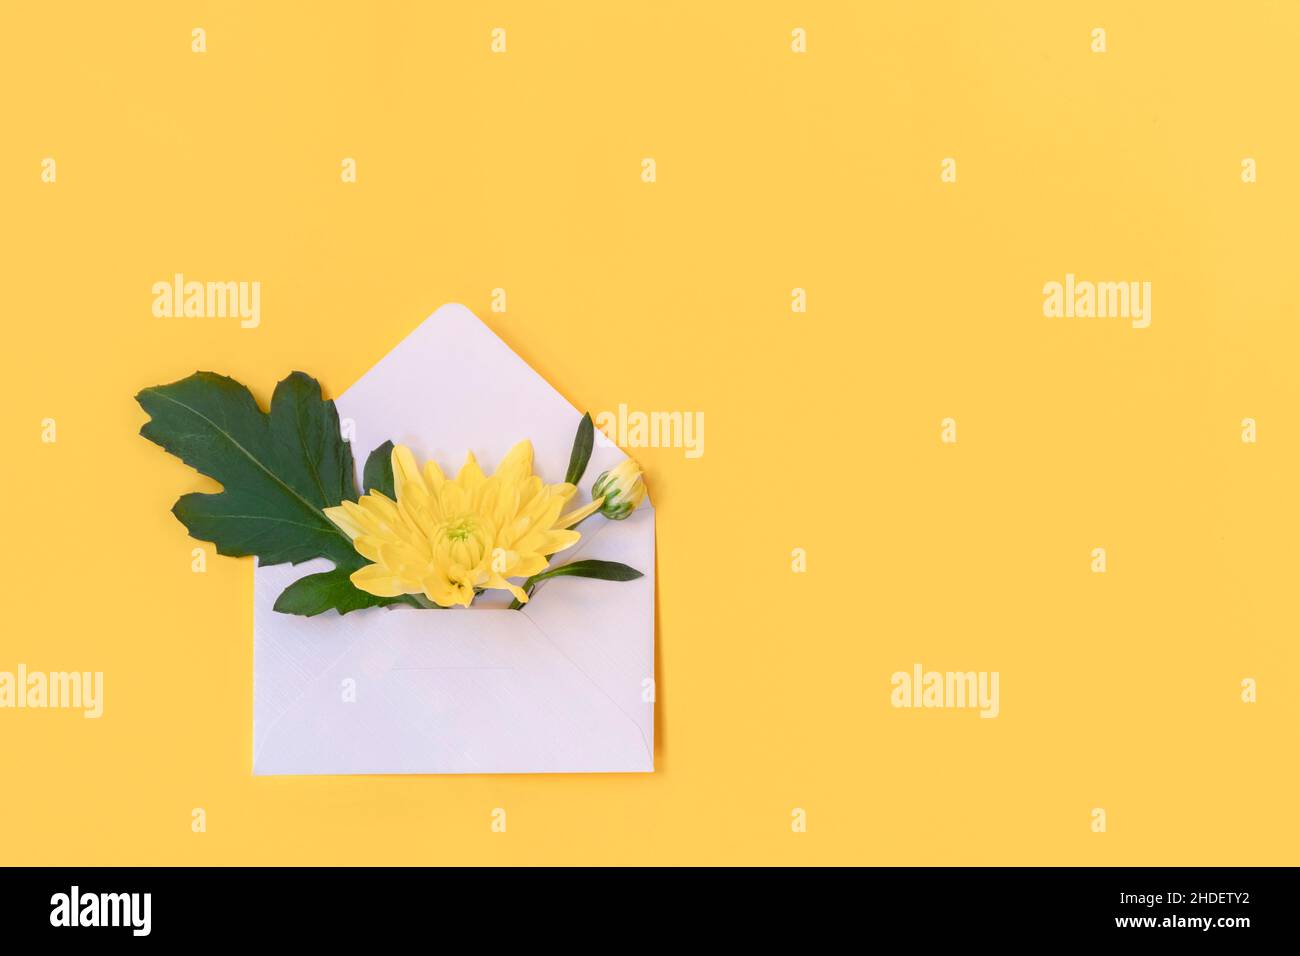 Flowers composition with envelope and yellow flowers on yellow background. Mockup, flat lay, top view, copy space Stock Photo